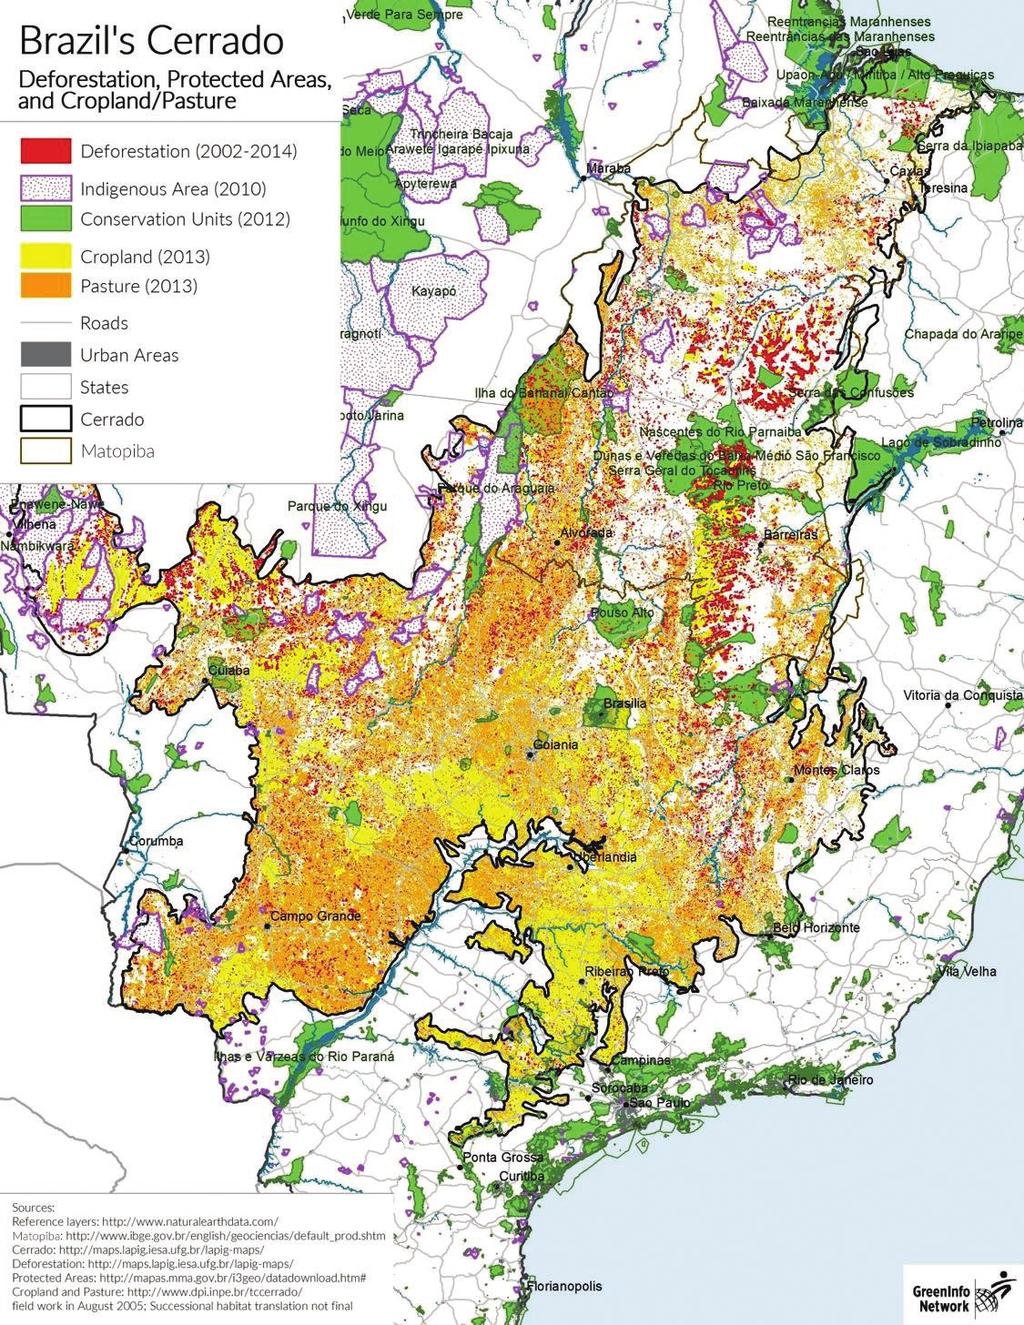 Expansion of cropland in western Bahia, northern Mato Grosso, Piauí, and Maranhão appears to be